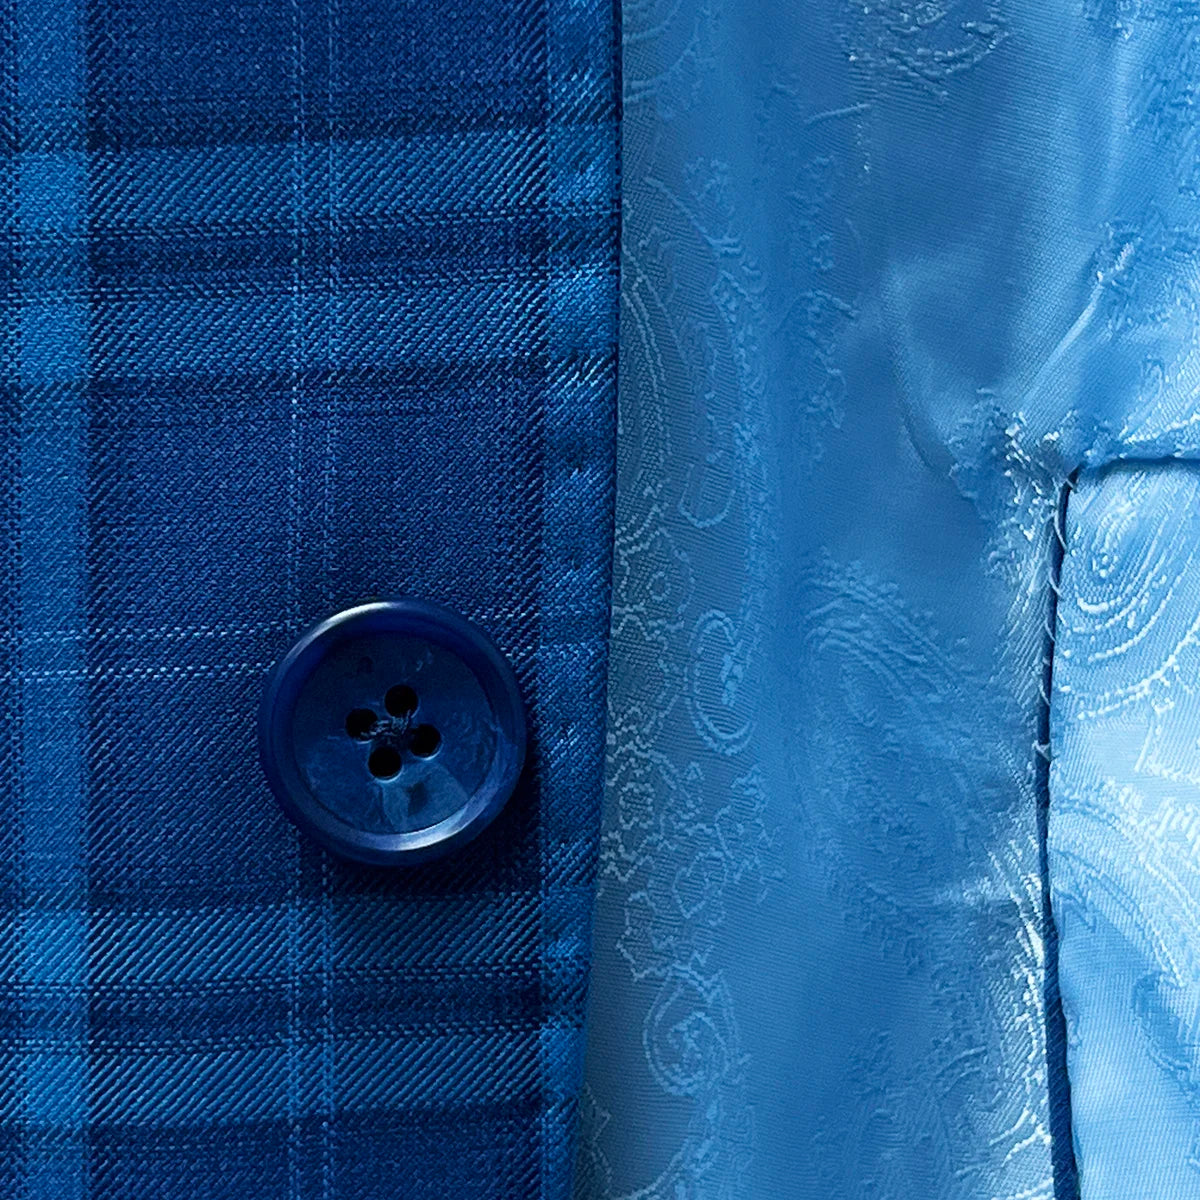 Horn buttons enhancing the classic look of a colbalt blue checkered plaid men's sport coat.